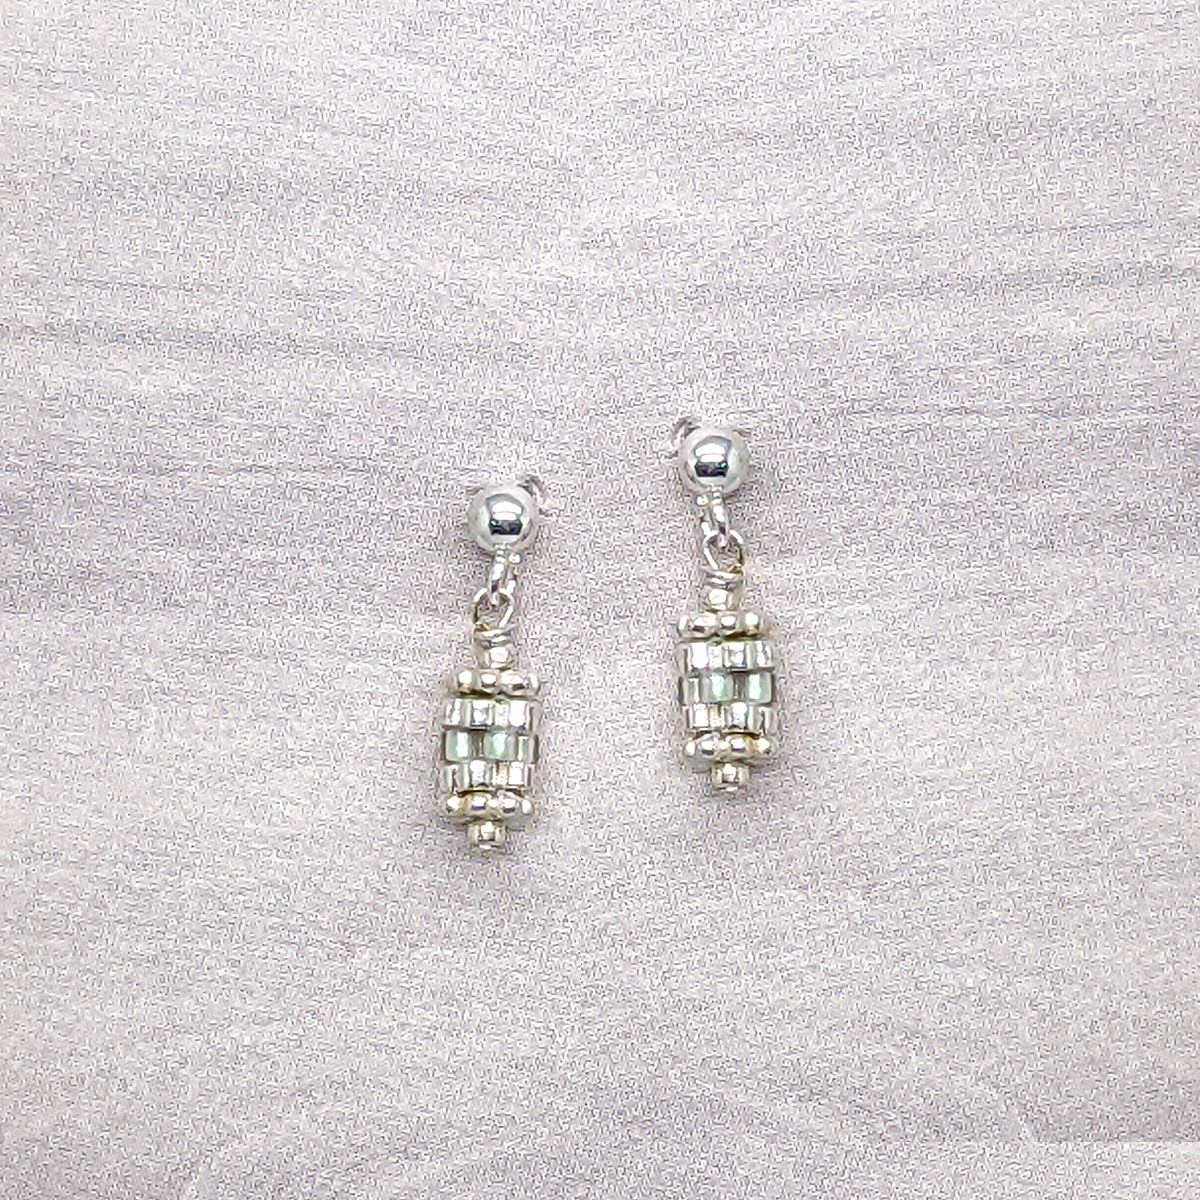 Itty Bits Textured Post Earrings